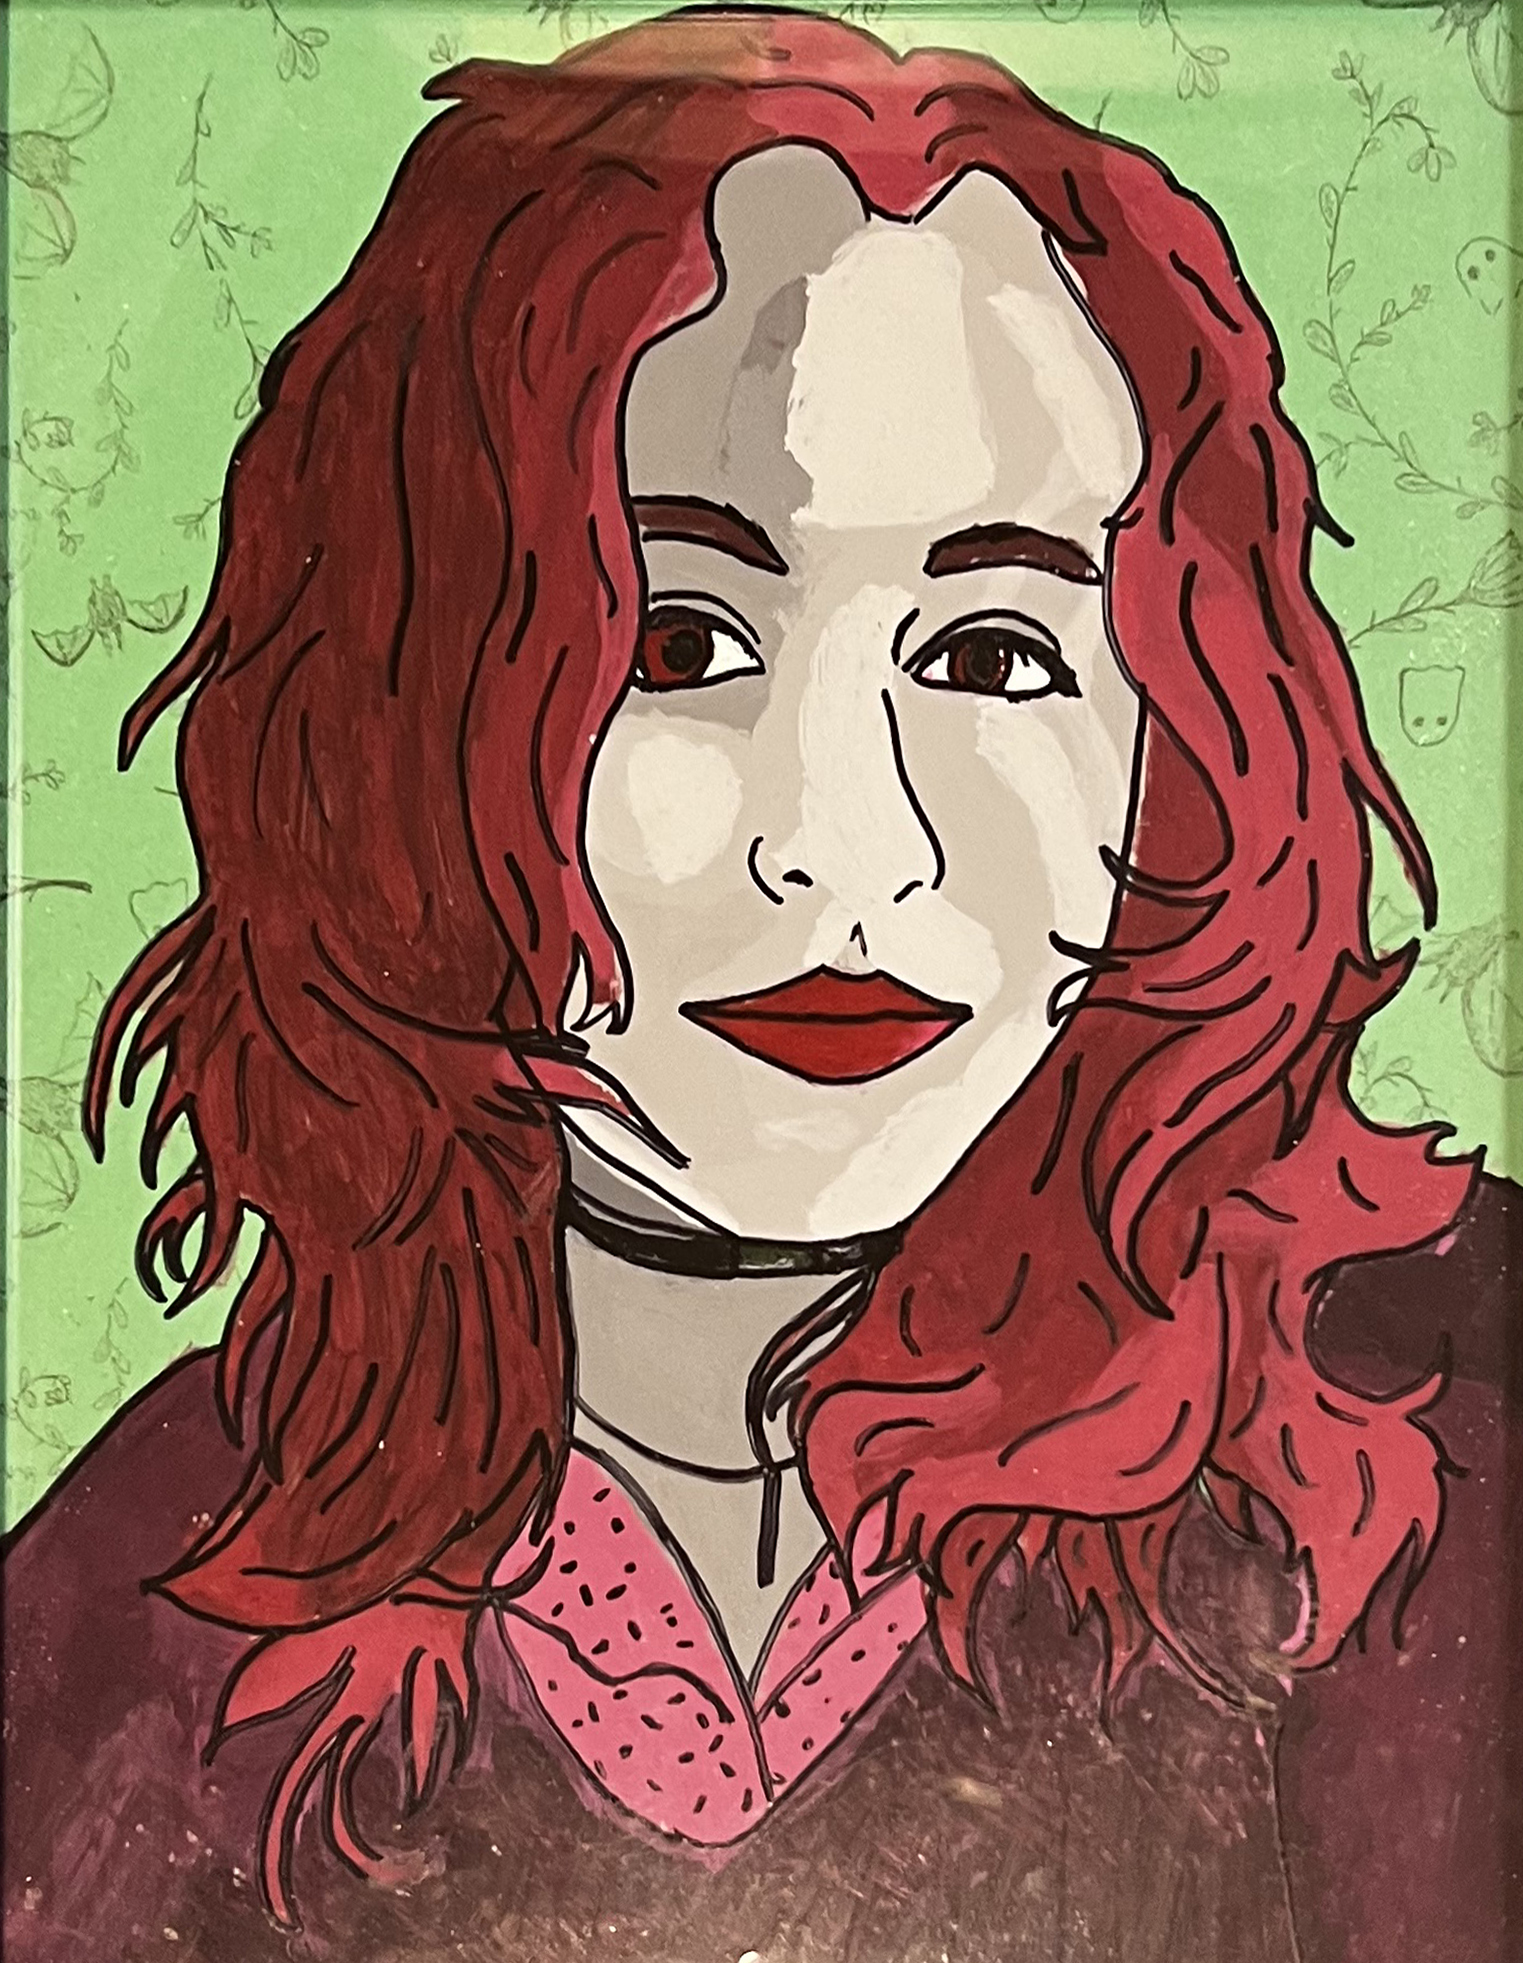 A portrait of a person with red hair, red eyes, and red lipstick. Their face is cell shaded in light flesh tones. they are wearing a brown shirt, a pink polka dotted blouse beneath. The background is light green with faint drawings of plants and doodled faces.